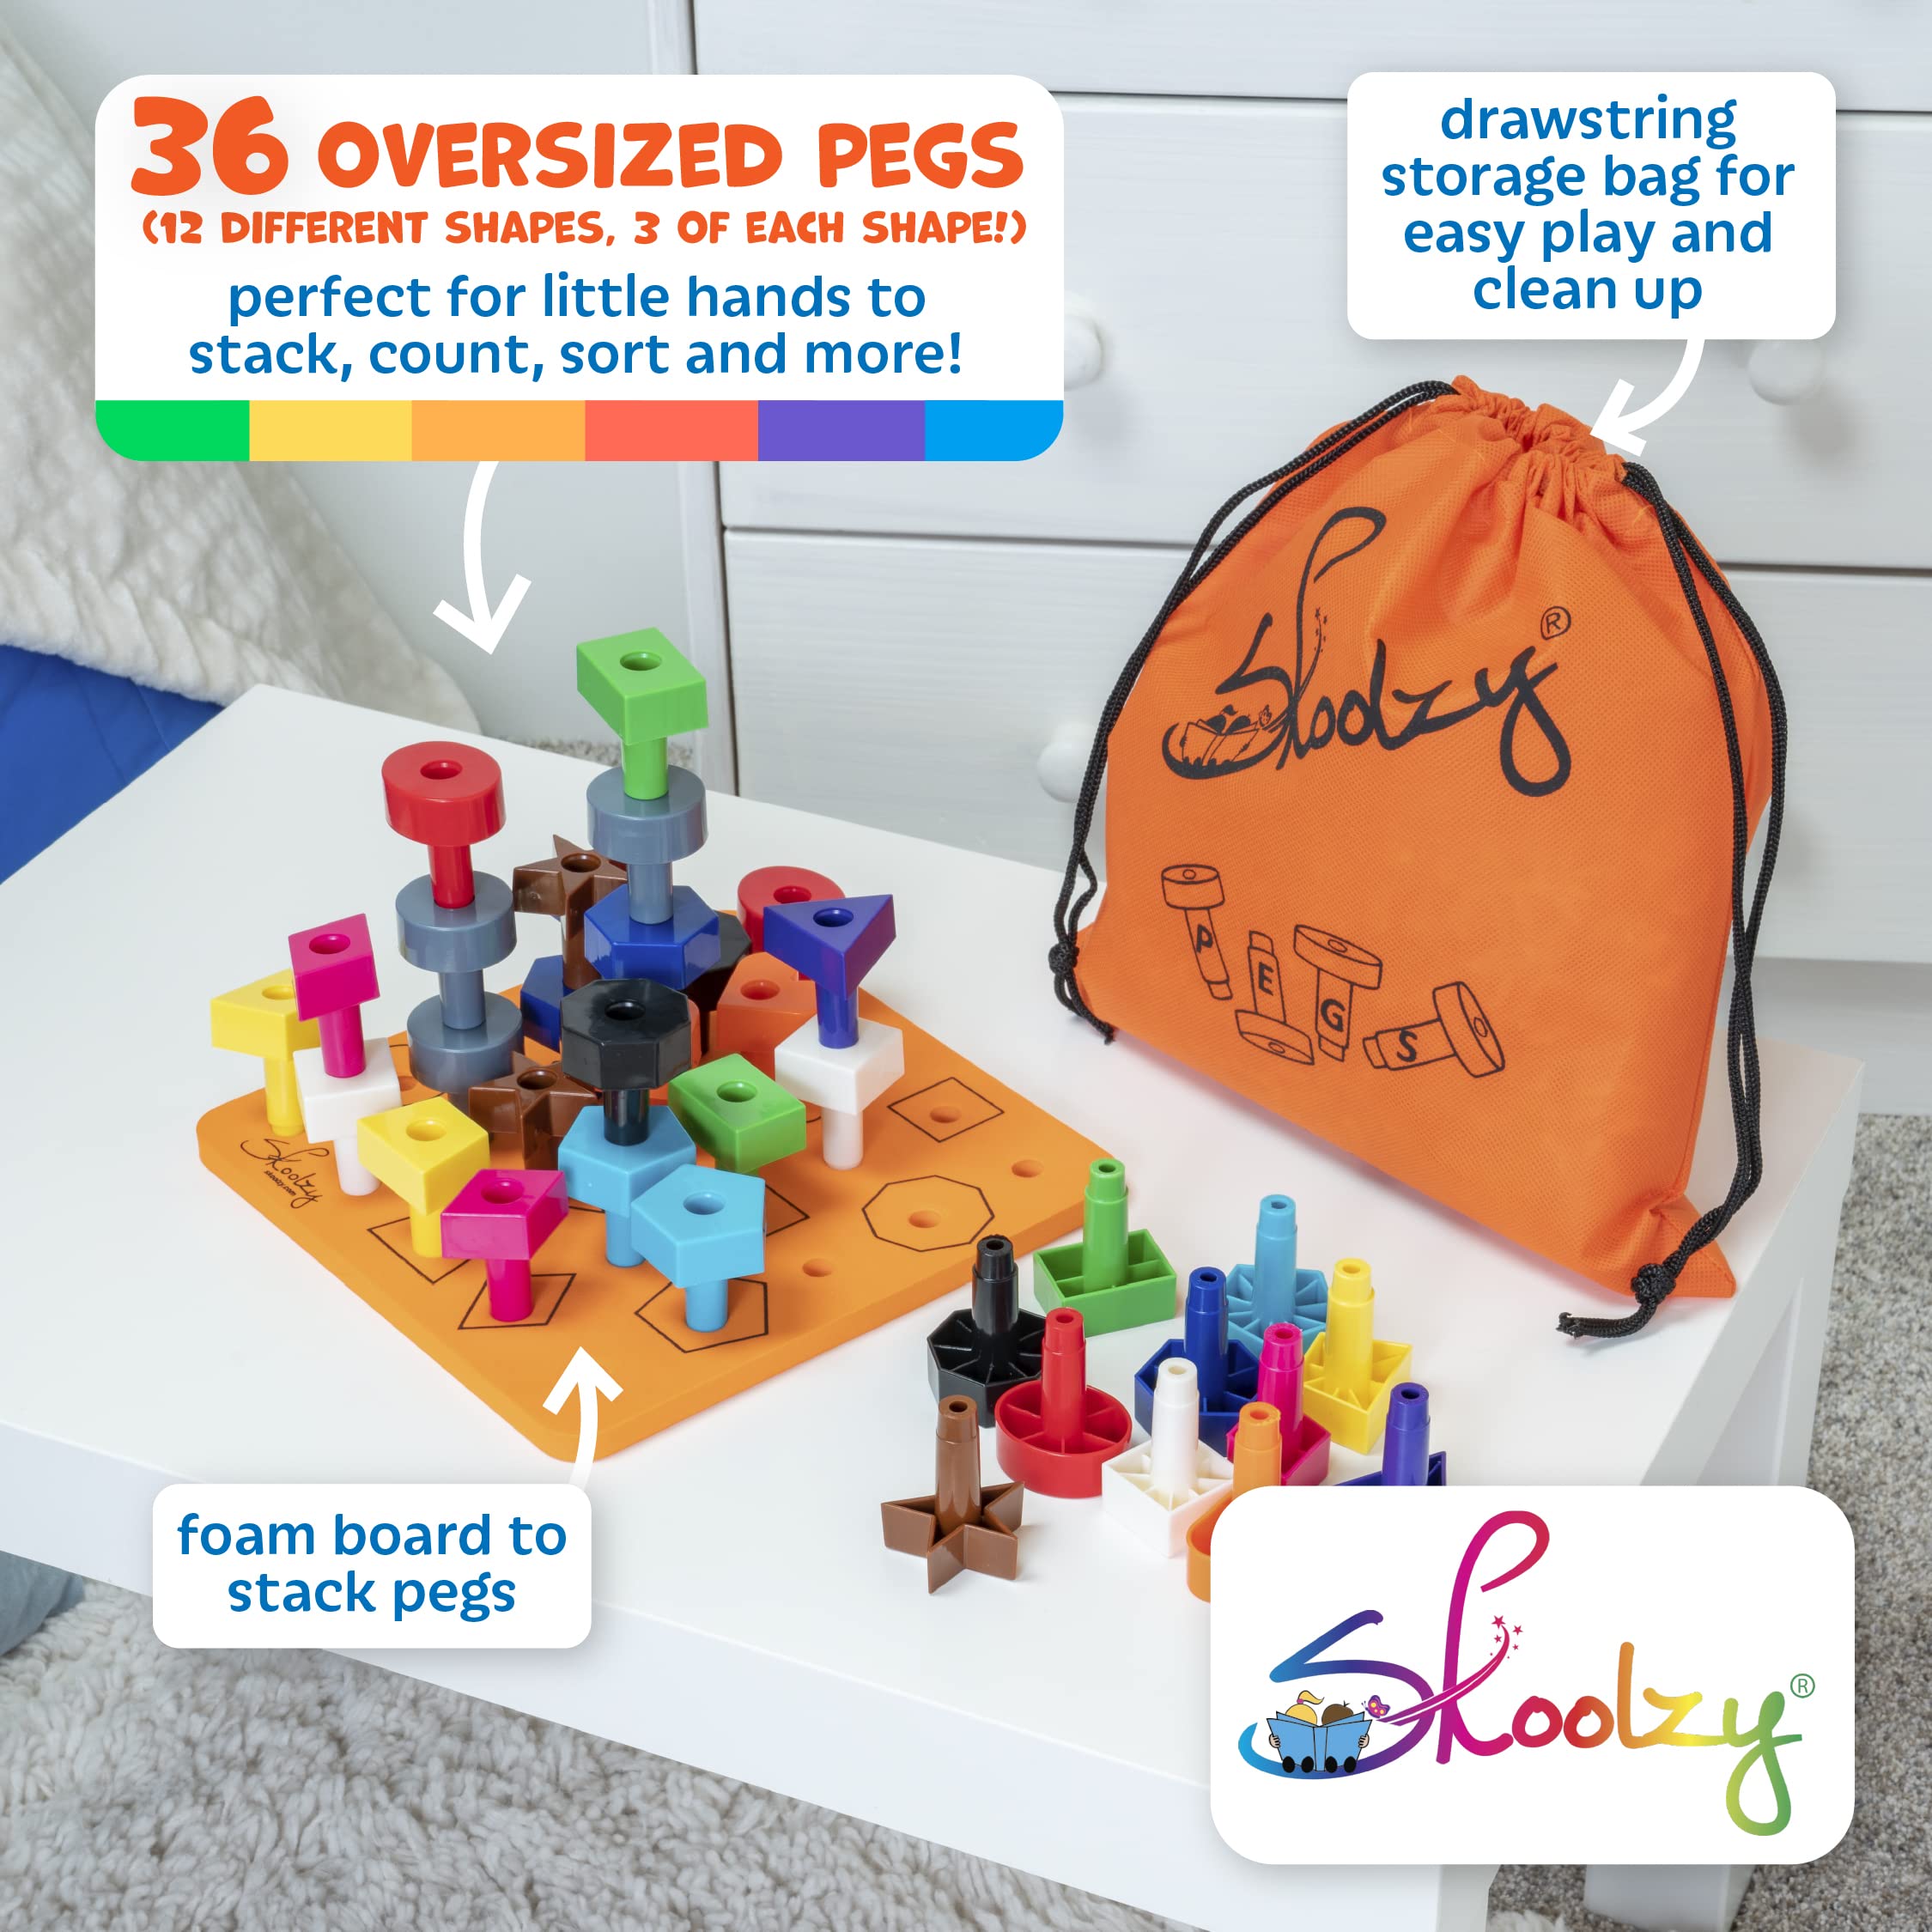 Skoolzy Stacking Toddler Peg Board 38 Piece Set - Sorting & Stacking Games Color Matching & Shape Recognition Toy for Toddlers & Preschoolers, Age 3+ Includes Pegs Foam Board Storage Bag and eBook